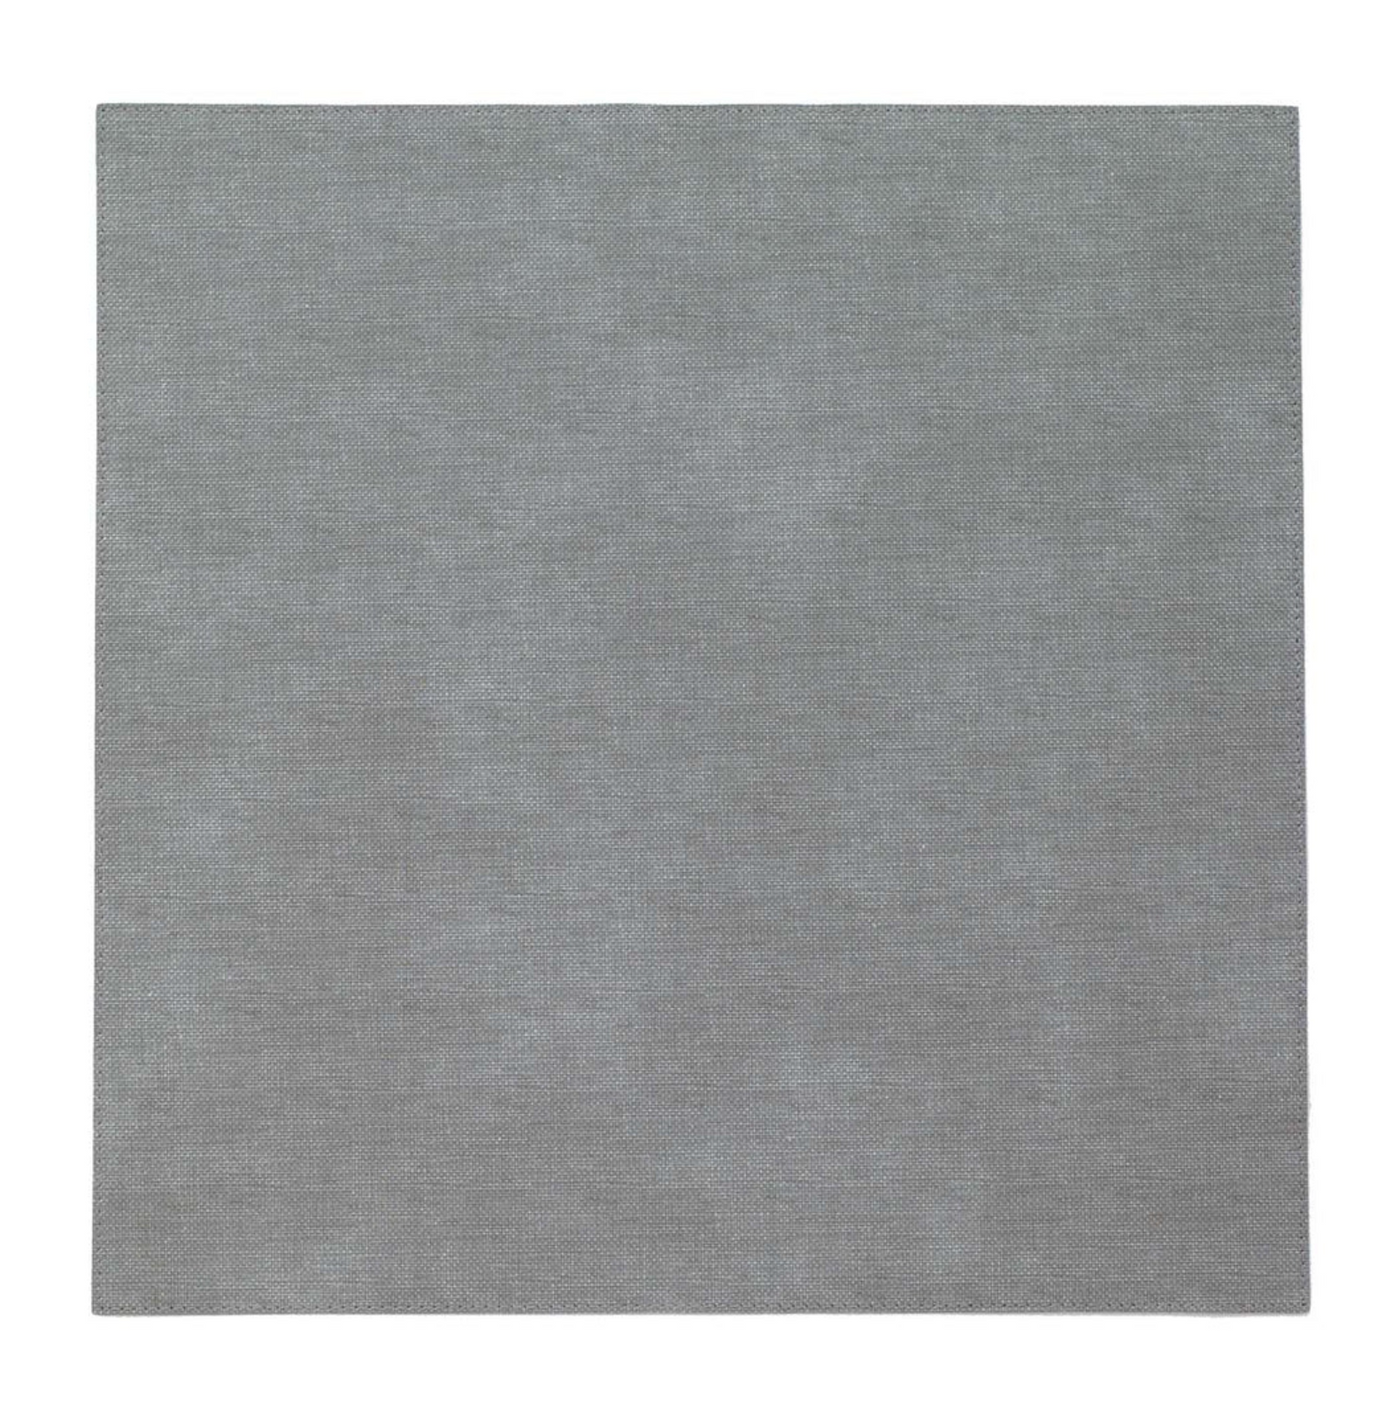 PLACEMAT PRESTO SQUARE (Available in 3 Colors)